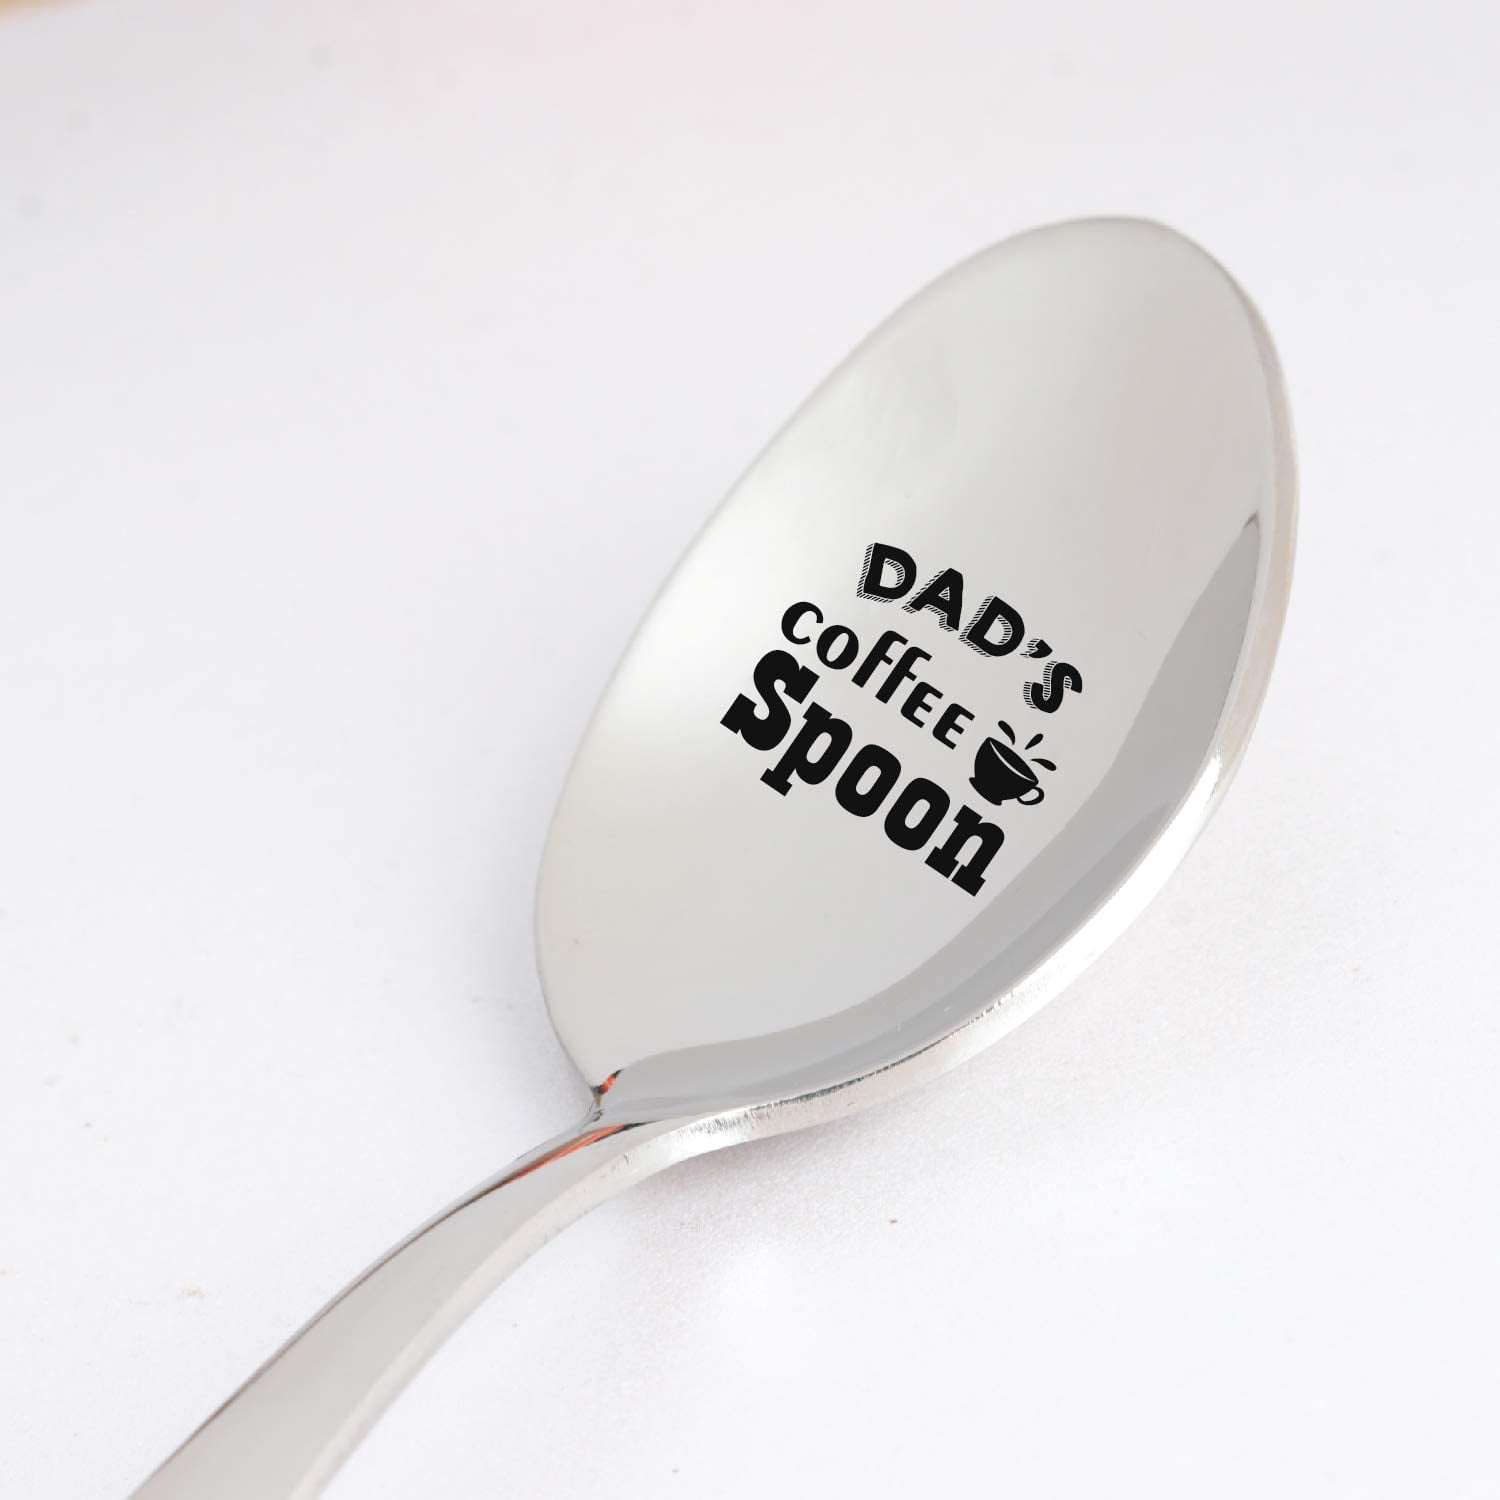 Funny Coffee Spoon Engraved Coffee Lover Gift for Grandpa Papa Gift from Granddaughter Grandson Wife Best Papa Gifts Papa Fathers Day/Birthday/Christmas Gifts Papas Coffee Spoon Engraved 